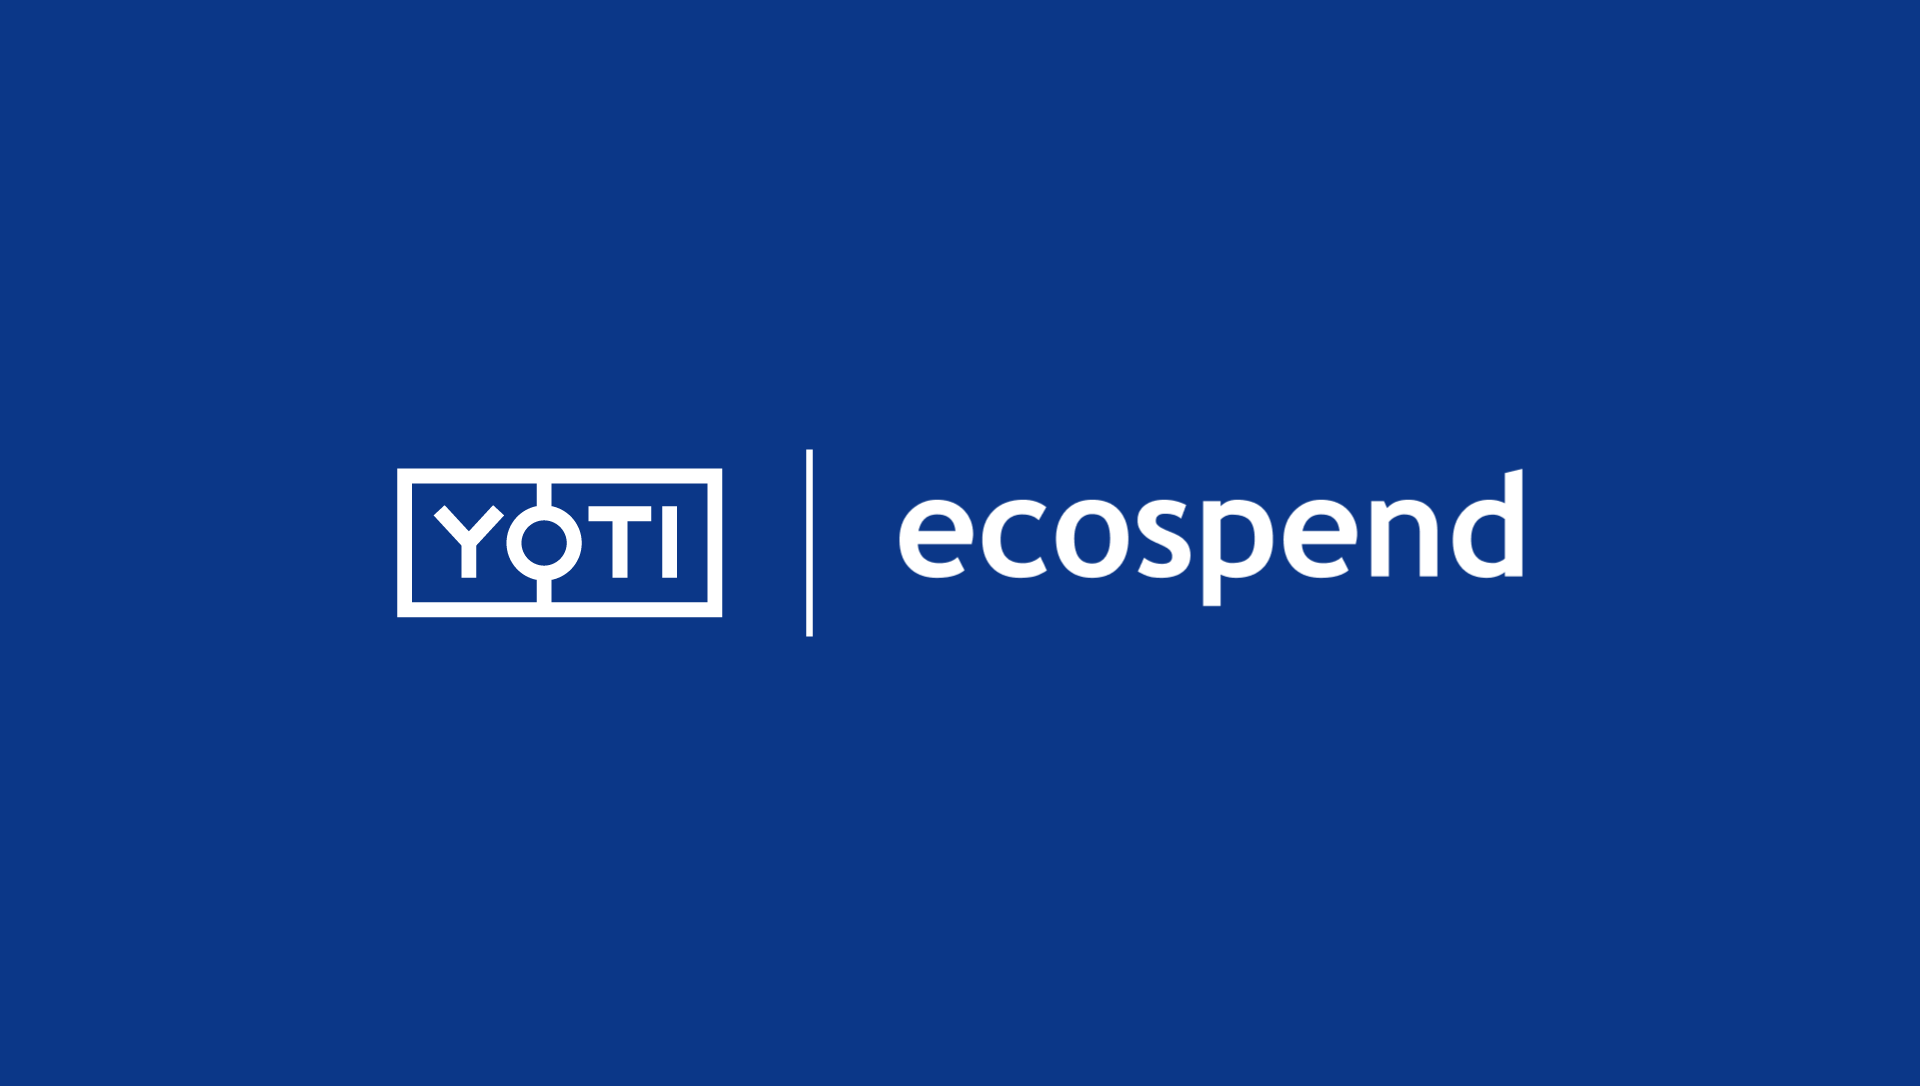 Yoti and Ecospend partner to combine digital identity with open banking